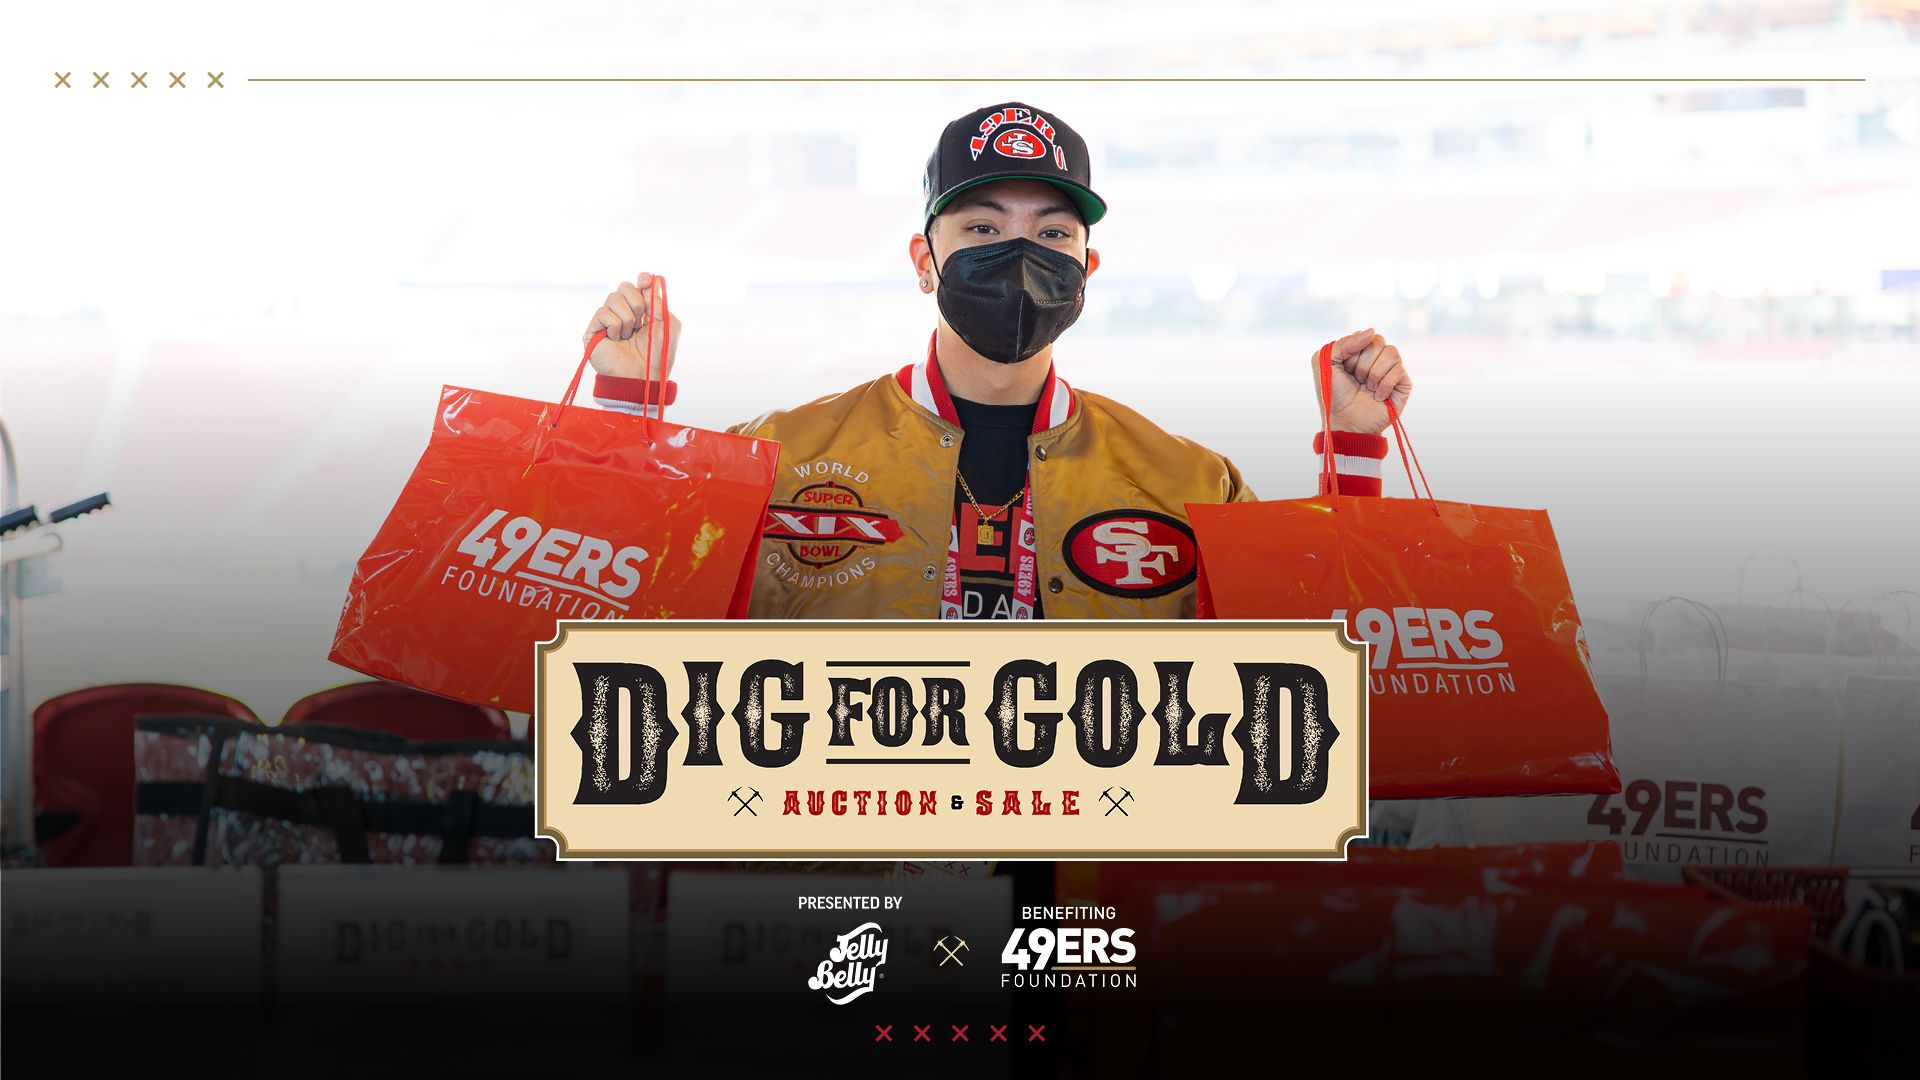 49ers Foundation Announces Details for the Holiday Sports Auction